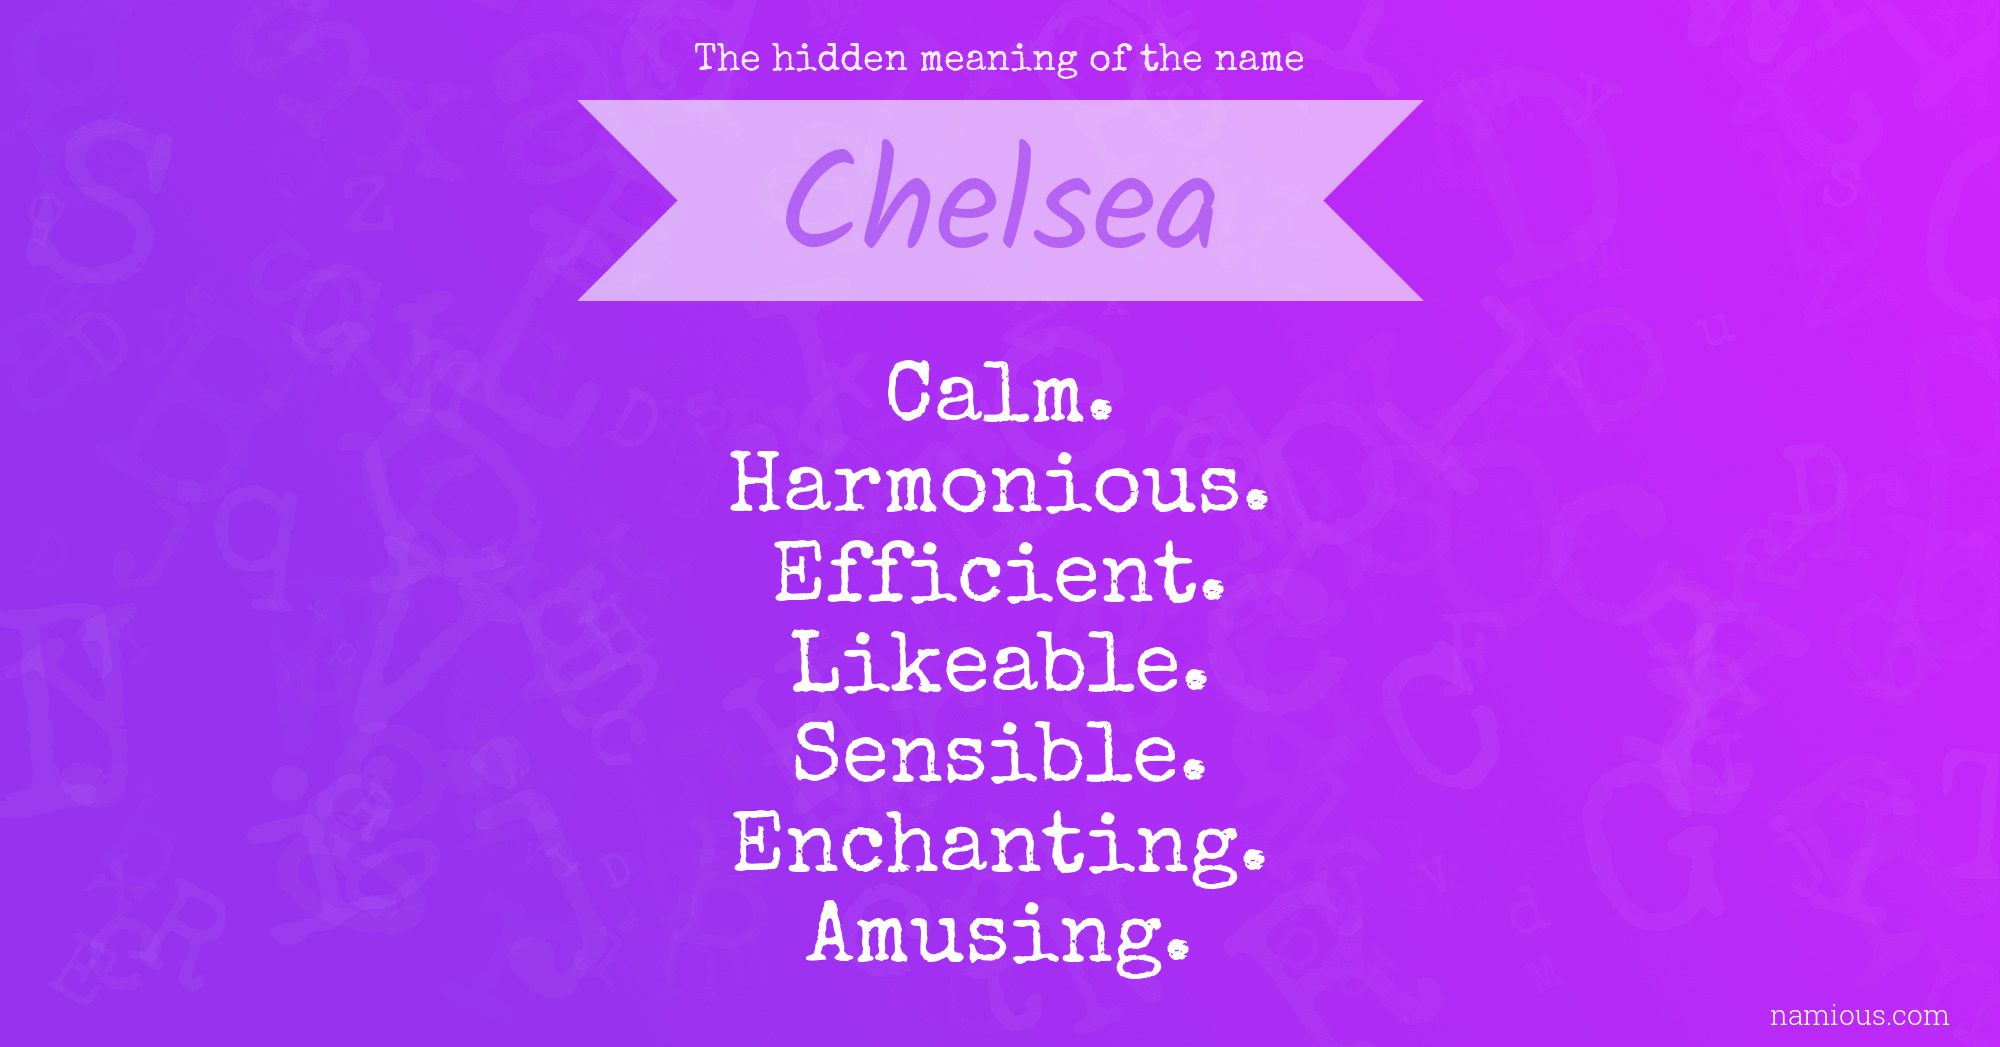 The hidden meaning of the name Chelsea